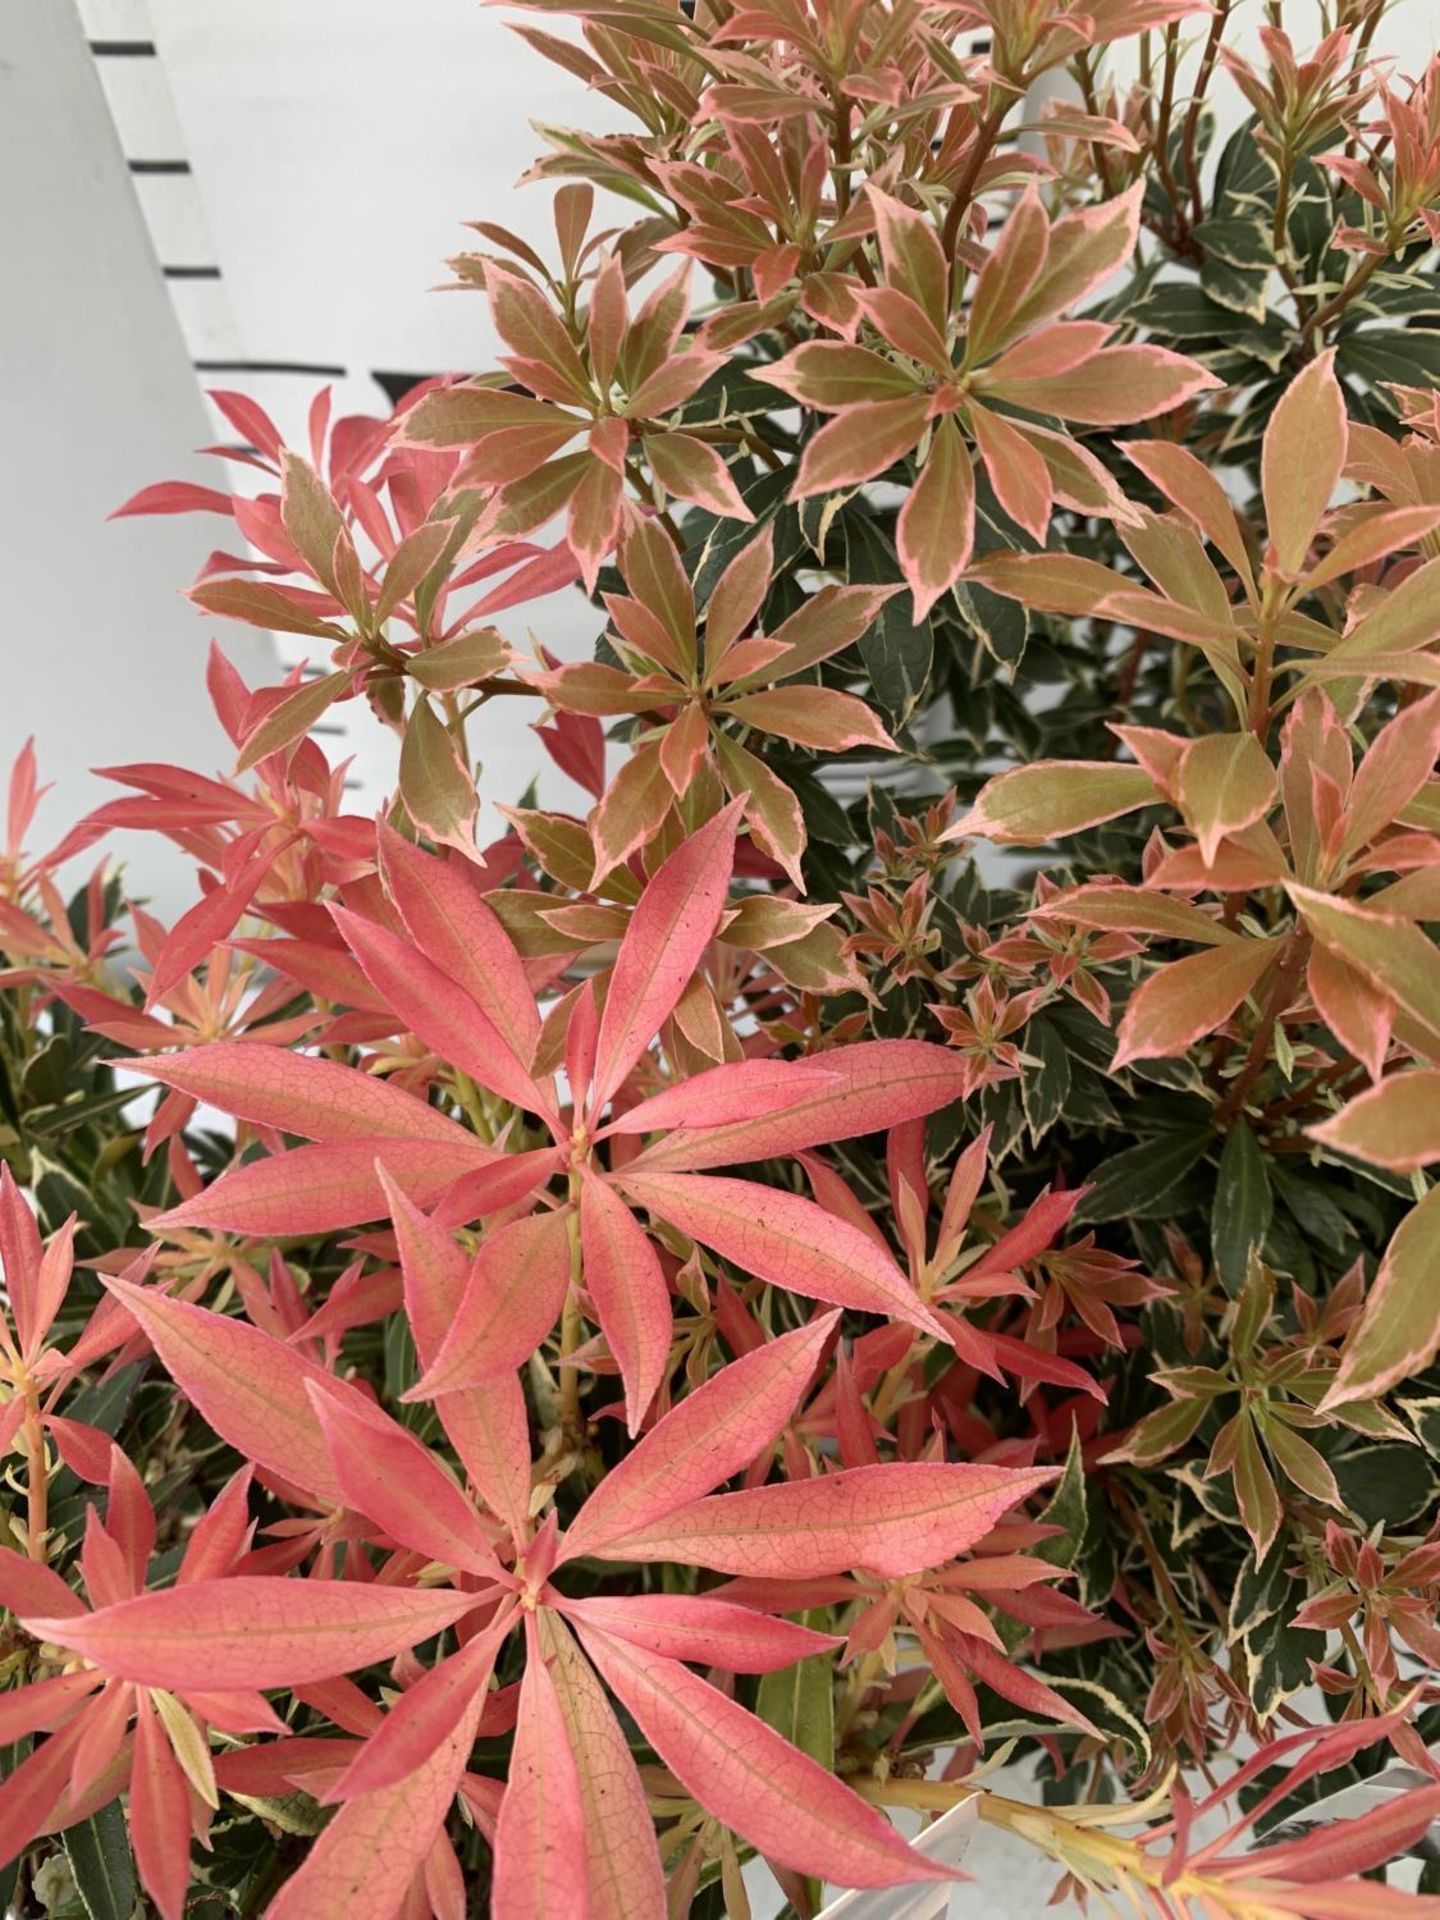 TWO PIERIS JAPONICA LITTLE HEATH AND FLAMING SILVER IN 3 LTR POTS 45CM TALL PLUS VAT TO BE SOLD - Image 10 of 10